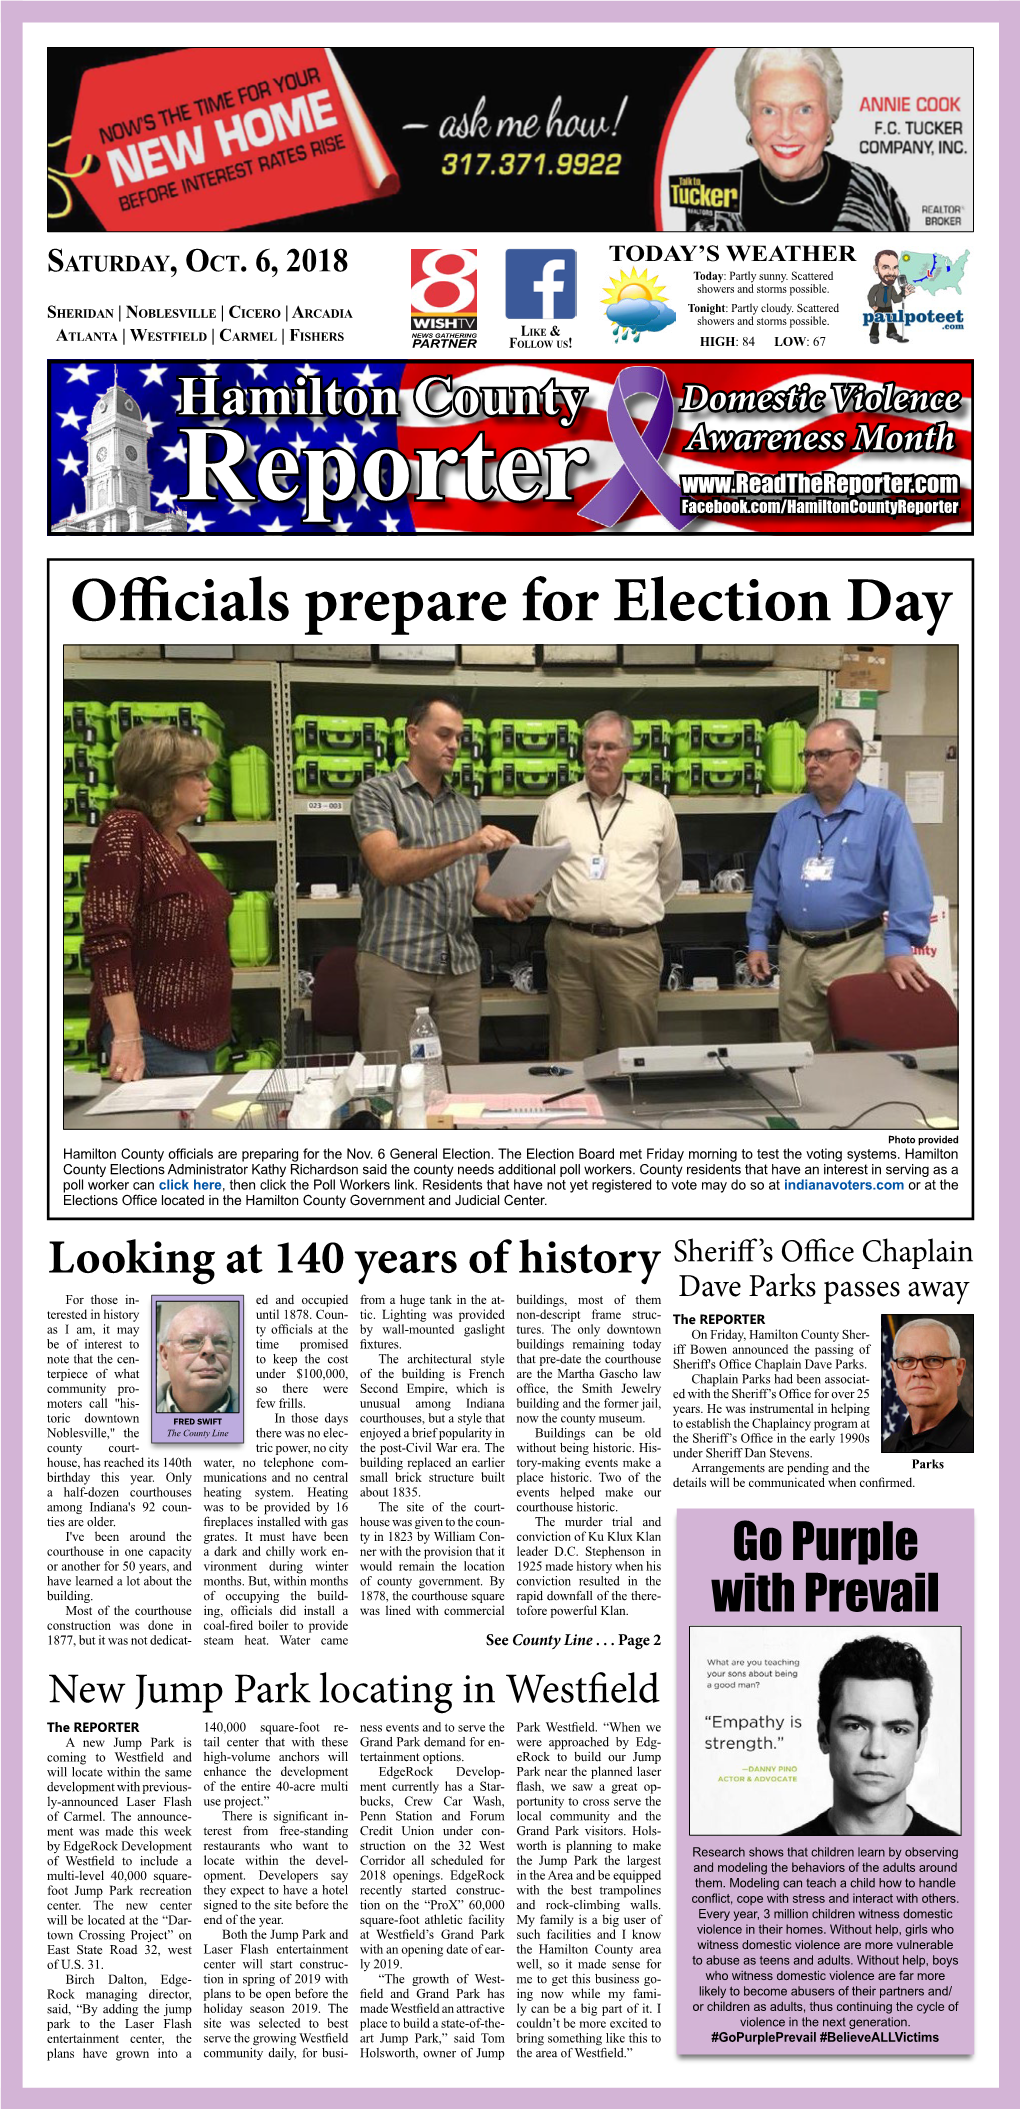 Officials Prepare for Election Day